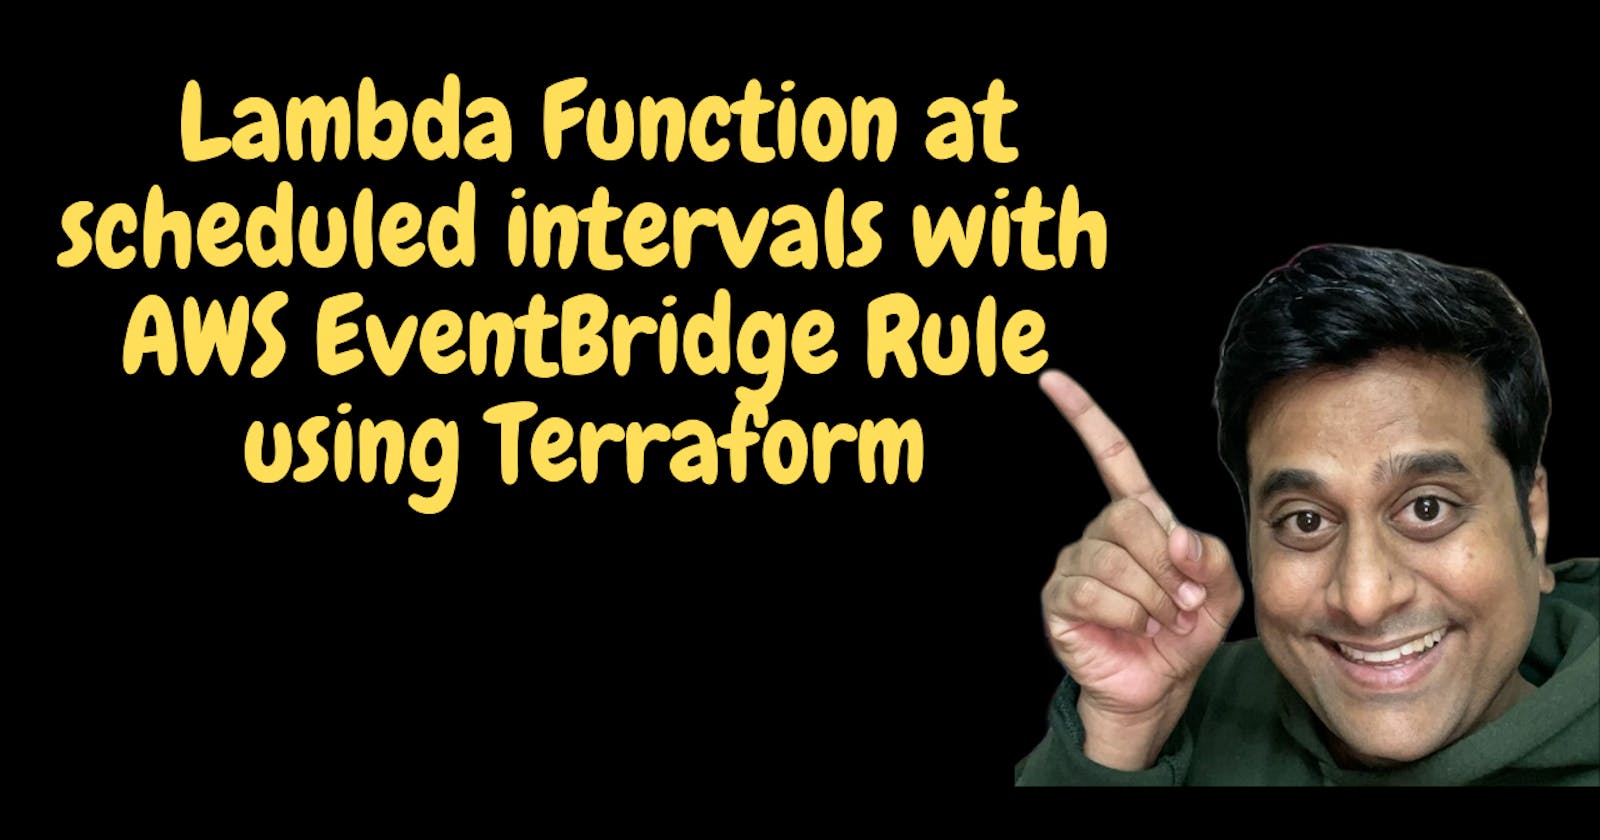 How to invoke an AWS Lambda Function at scheduled intervals with AWS EventBridge Rule using Terraform